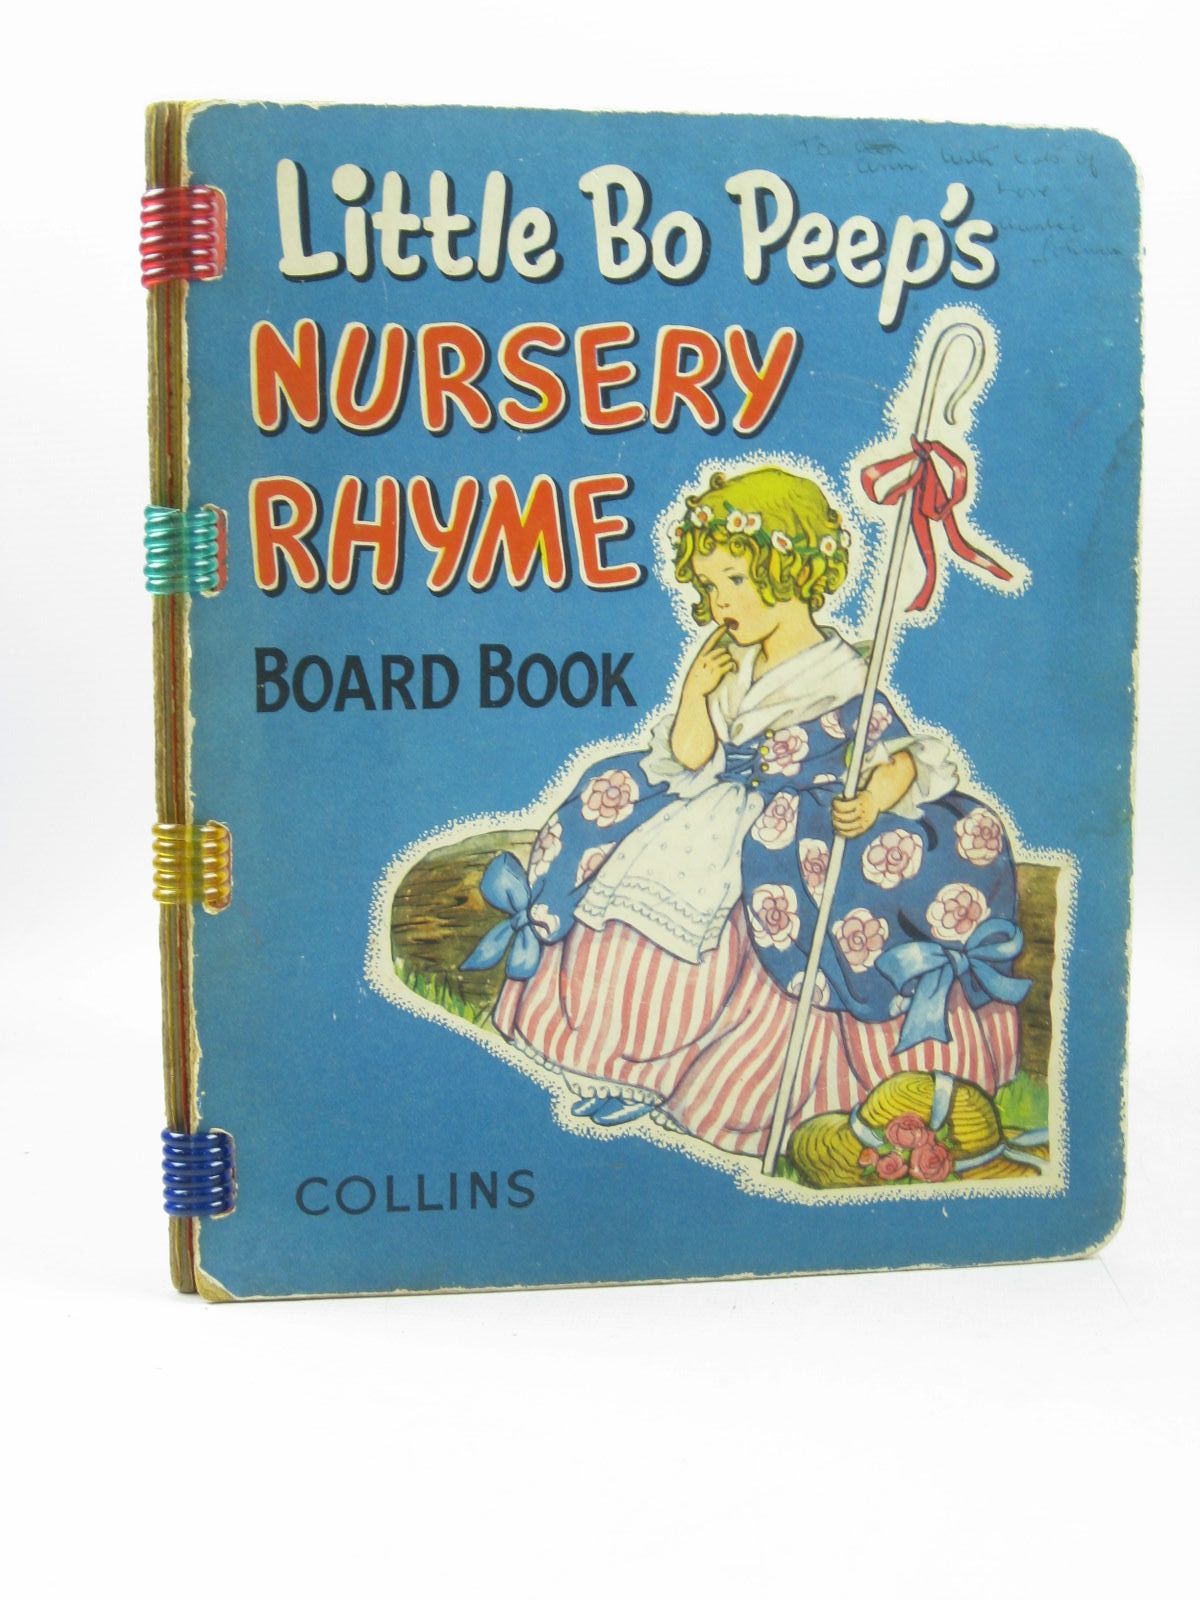 Photo of LITTLE BO-PEEP'S NURSERY RHYME BOARD BOOK illustrated by E.W.B., published by Collins (STOCK CODE: 1403232)  for sale by Stella & Rose's Books